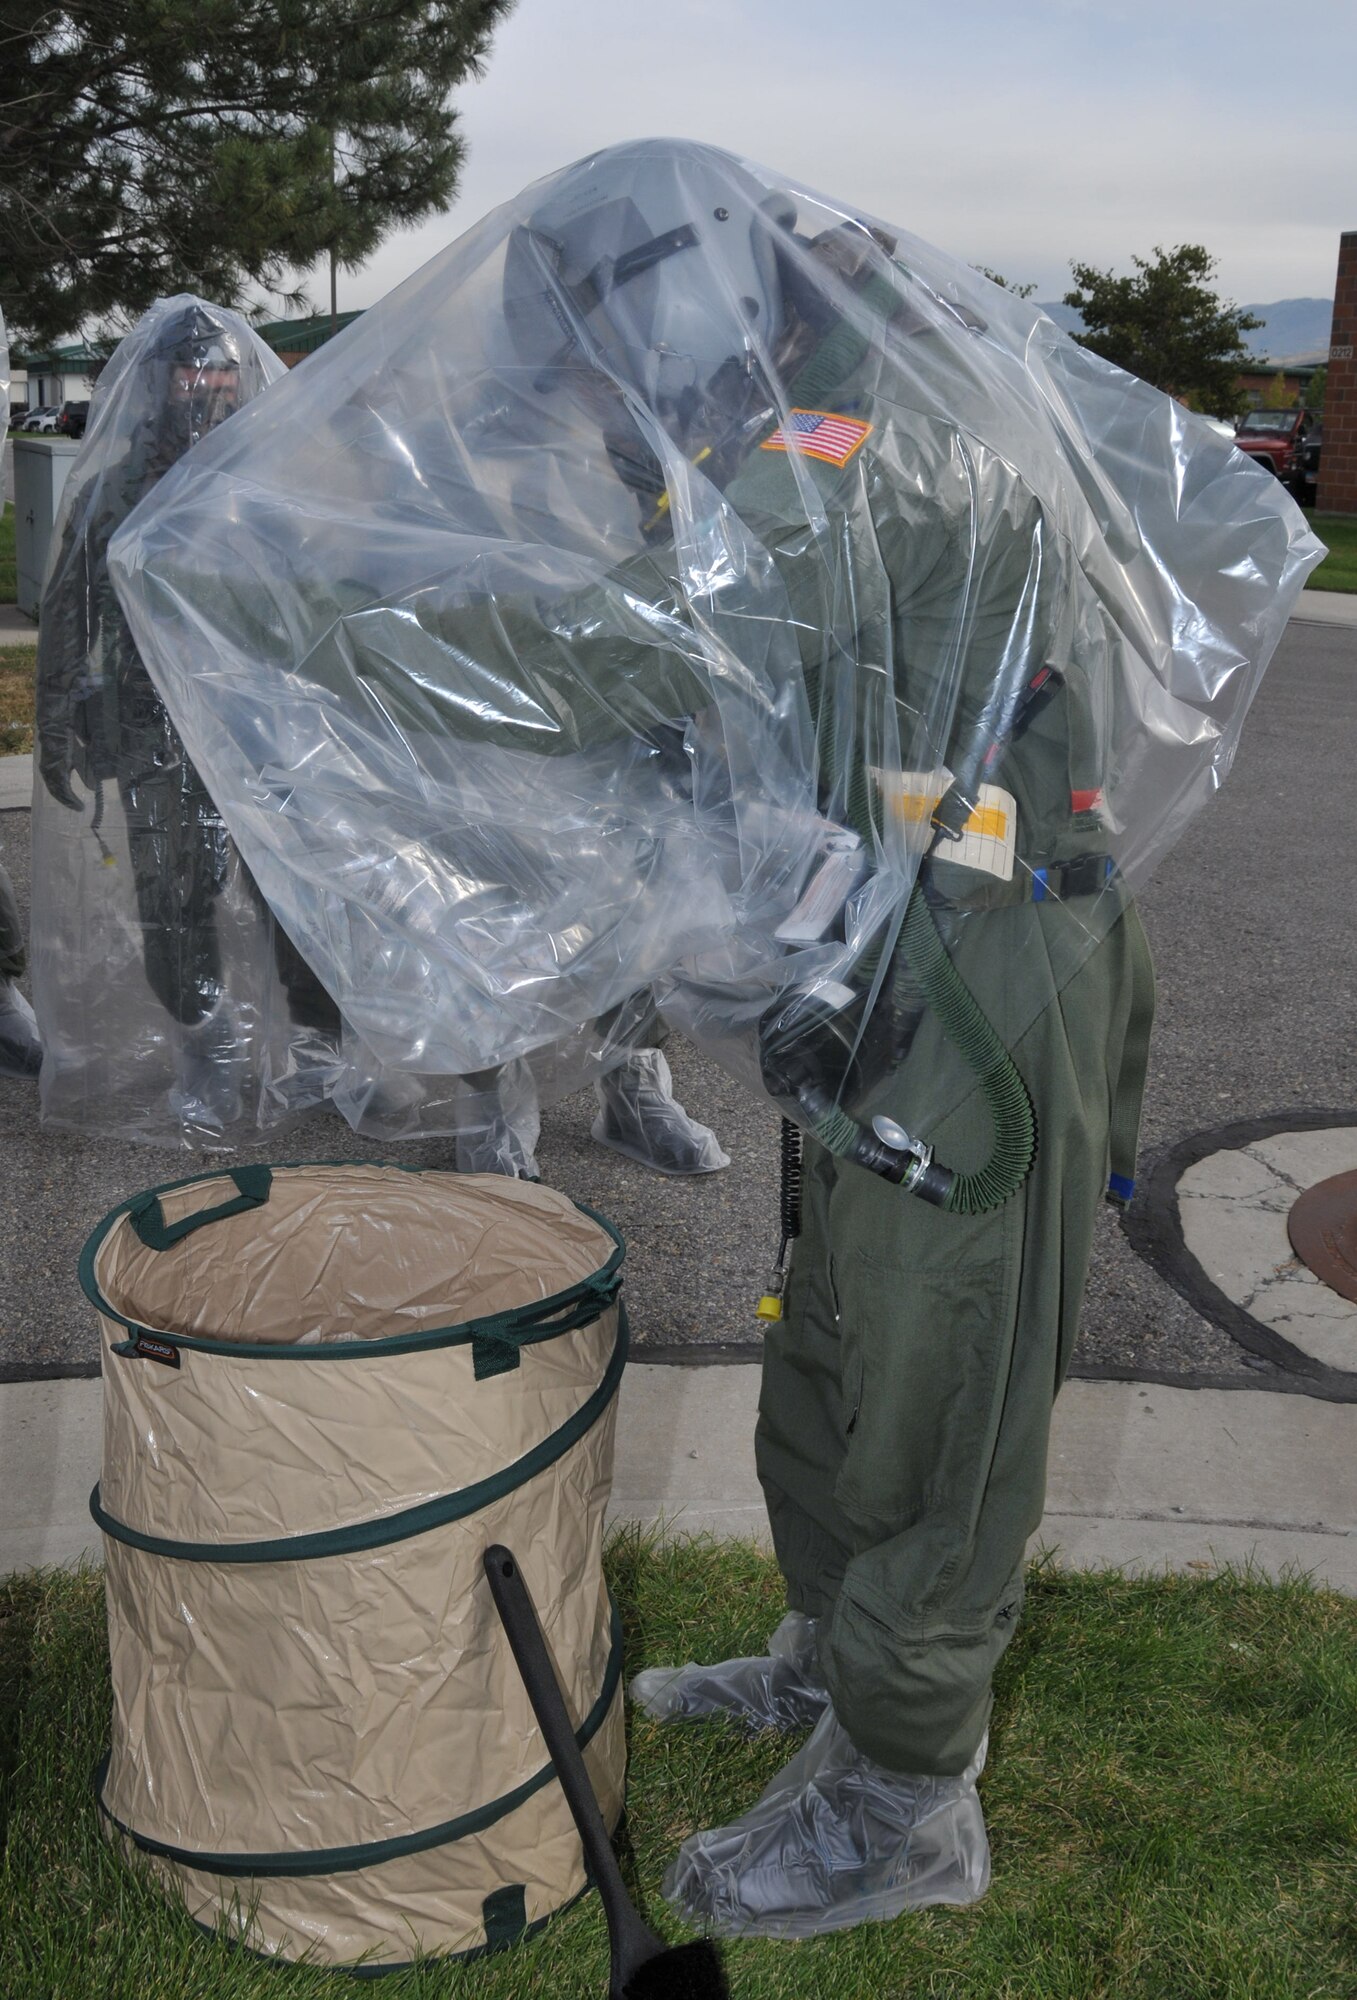 2nd Lt. Jason R Holbrook, 151st Operations Group, removes his chemical covering before moving to  a decontamination point during an Ability to Survive and Operate (ATSO) training exercise October 3. The exercise provided an opportunity for aircrew and support personnel to train in a simulated chemical environment. Air Force photo by Tech. Sgt. Michael D. Evans.